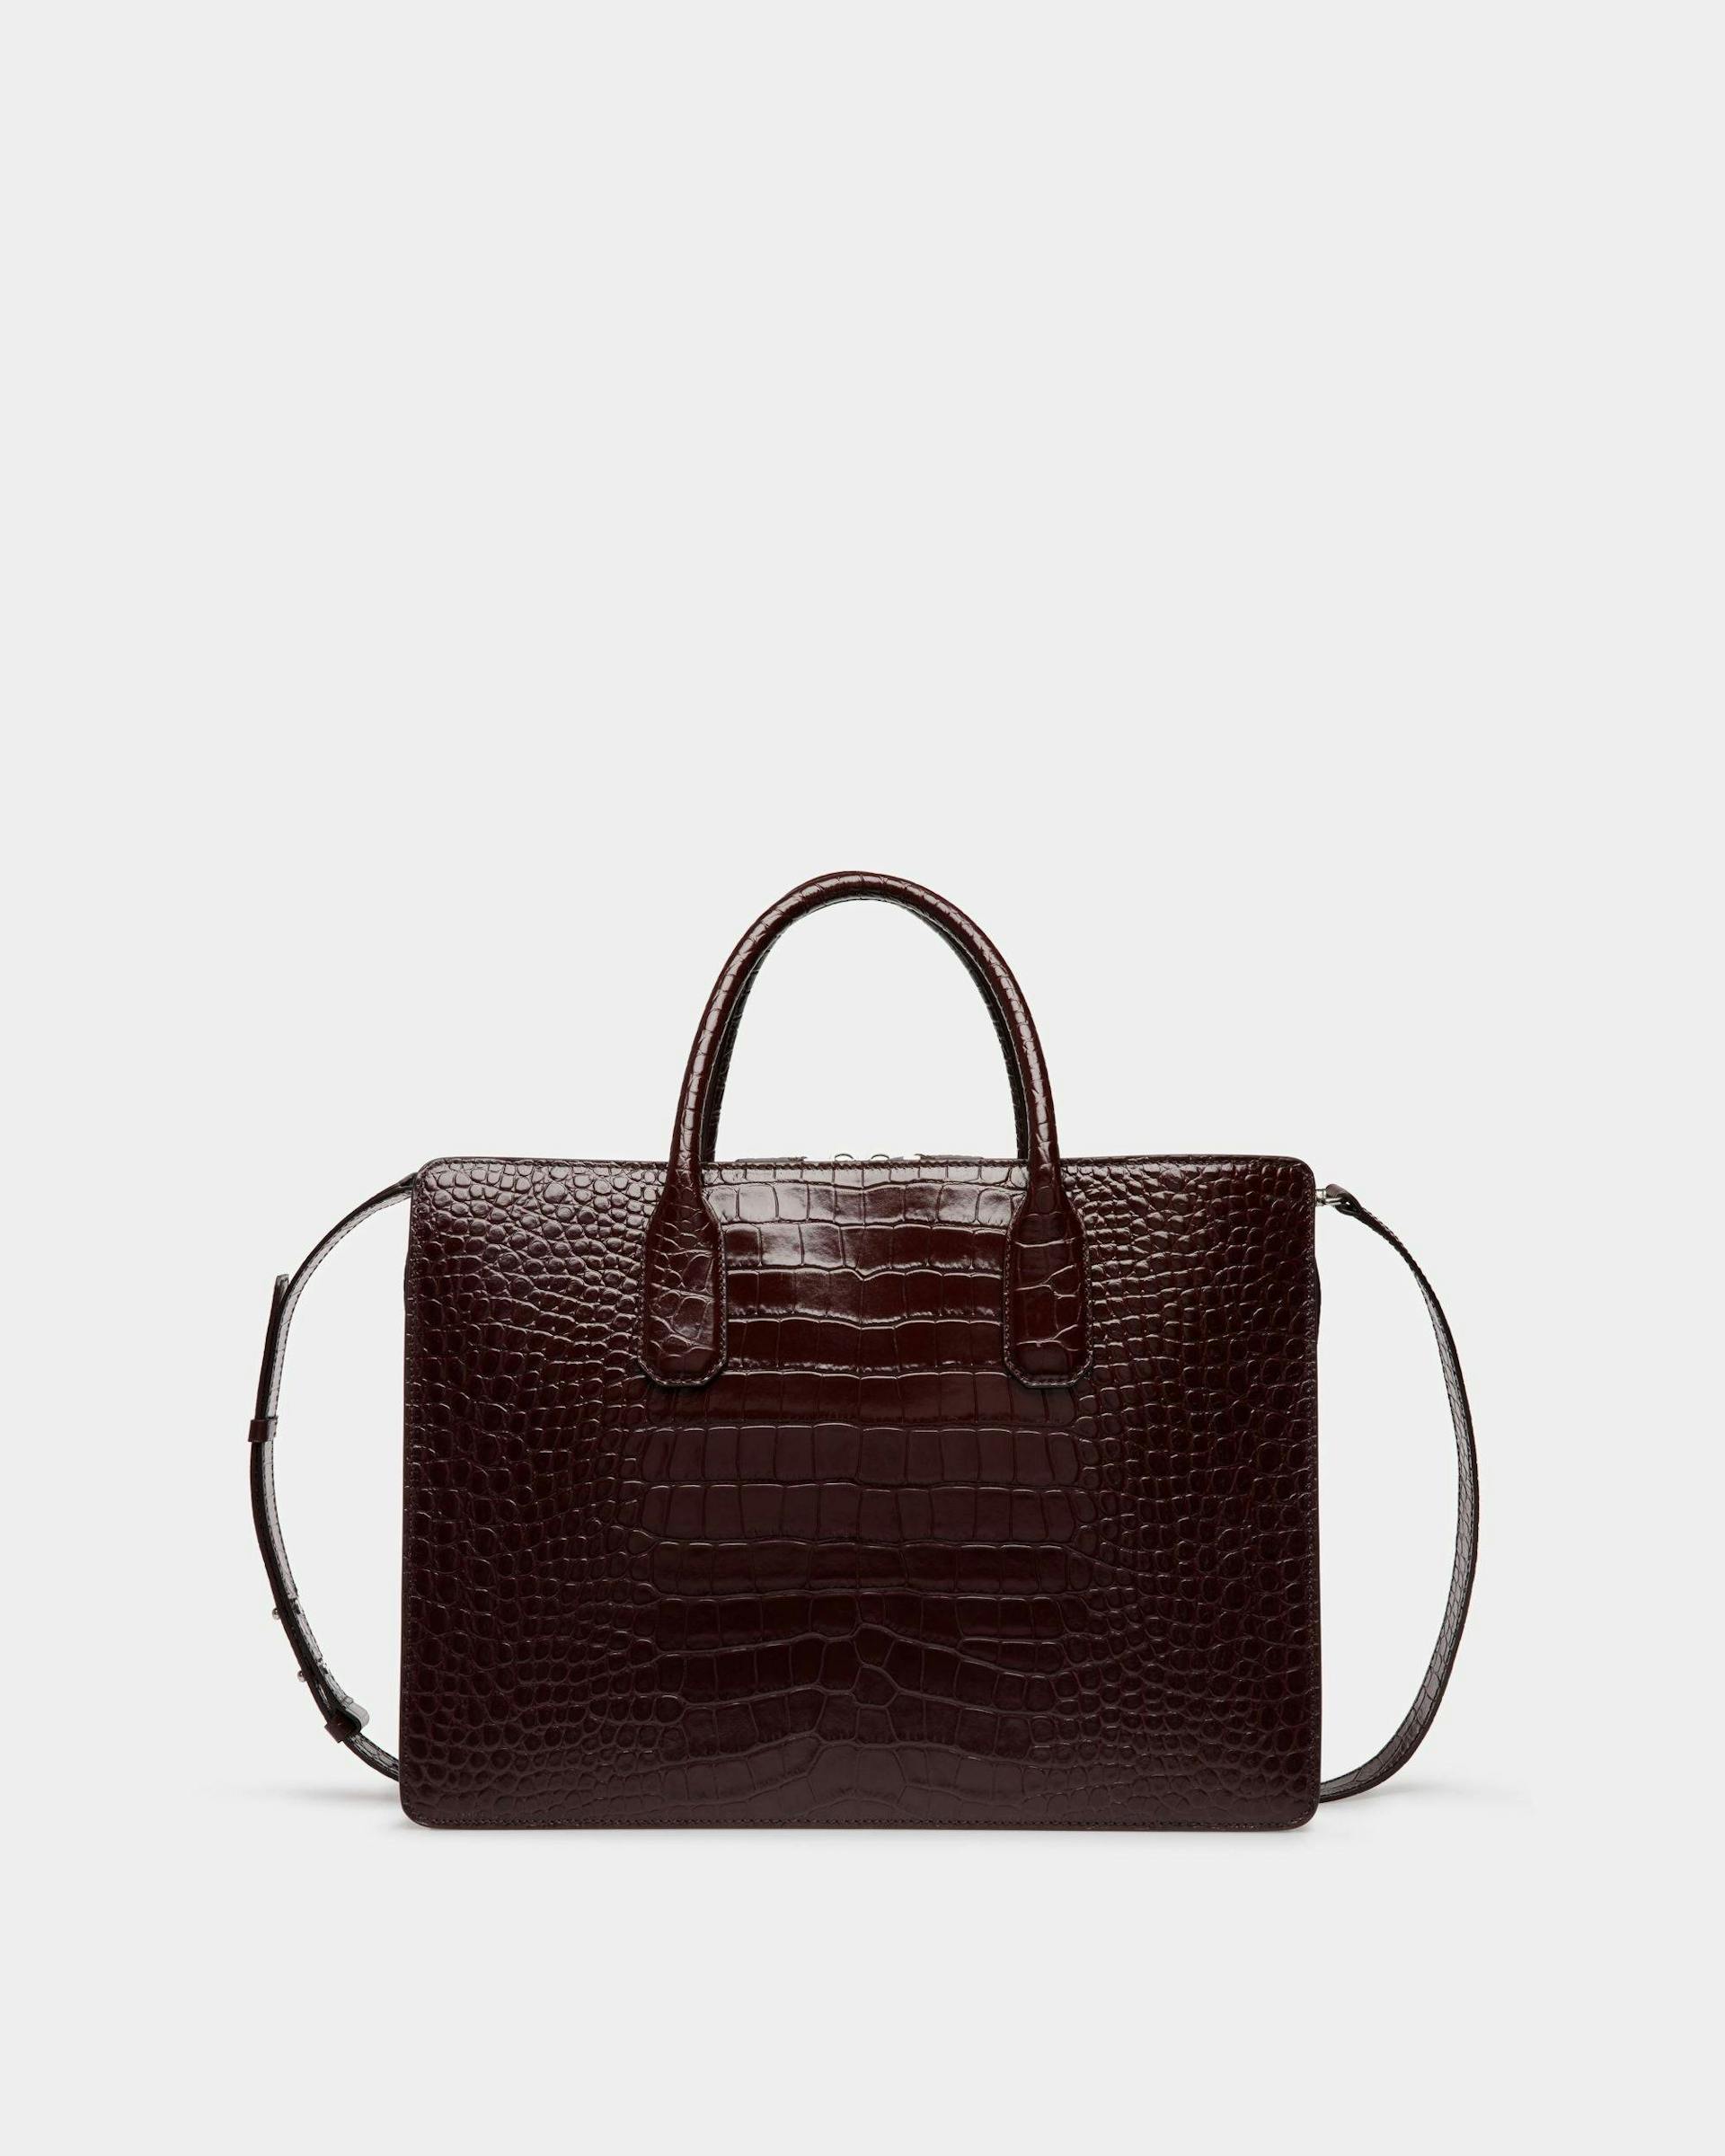 Men's Banque Business Bag In Chablis Leather | Bally | Still Life Back